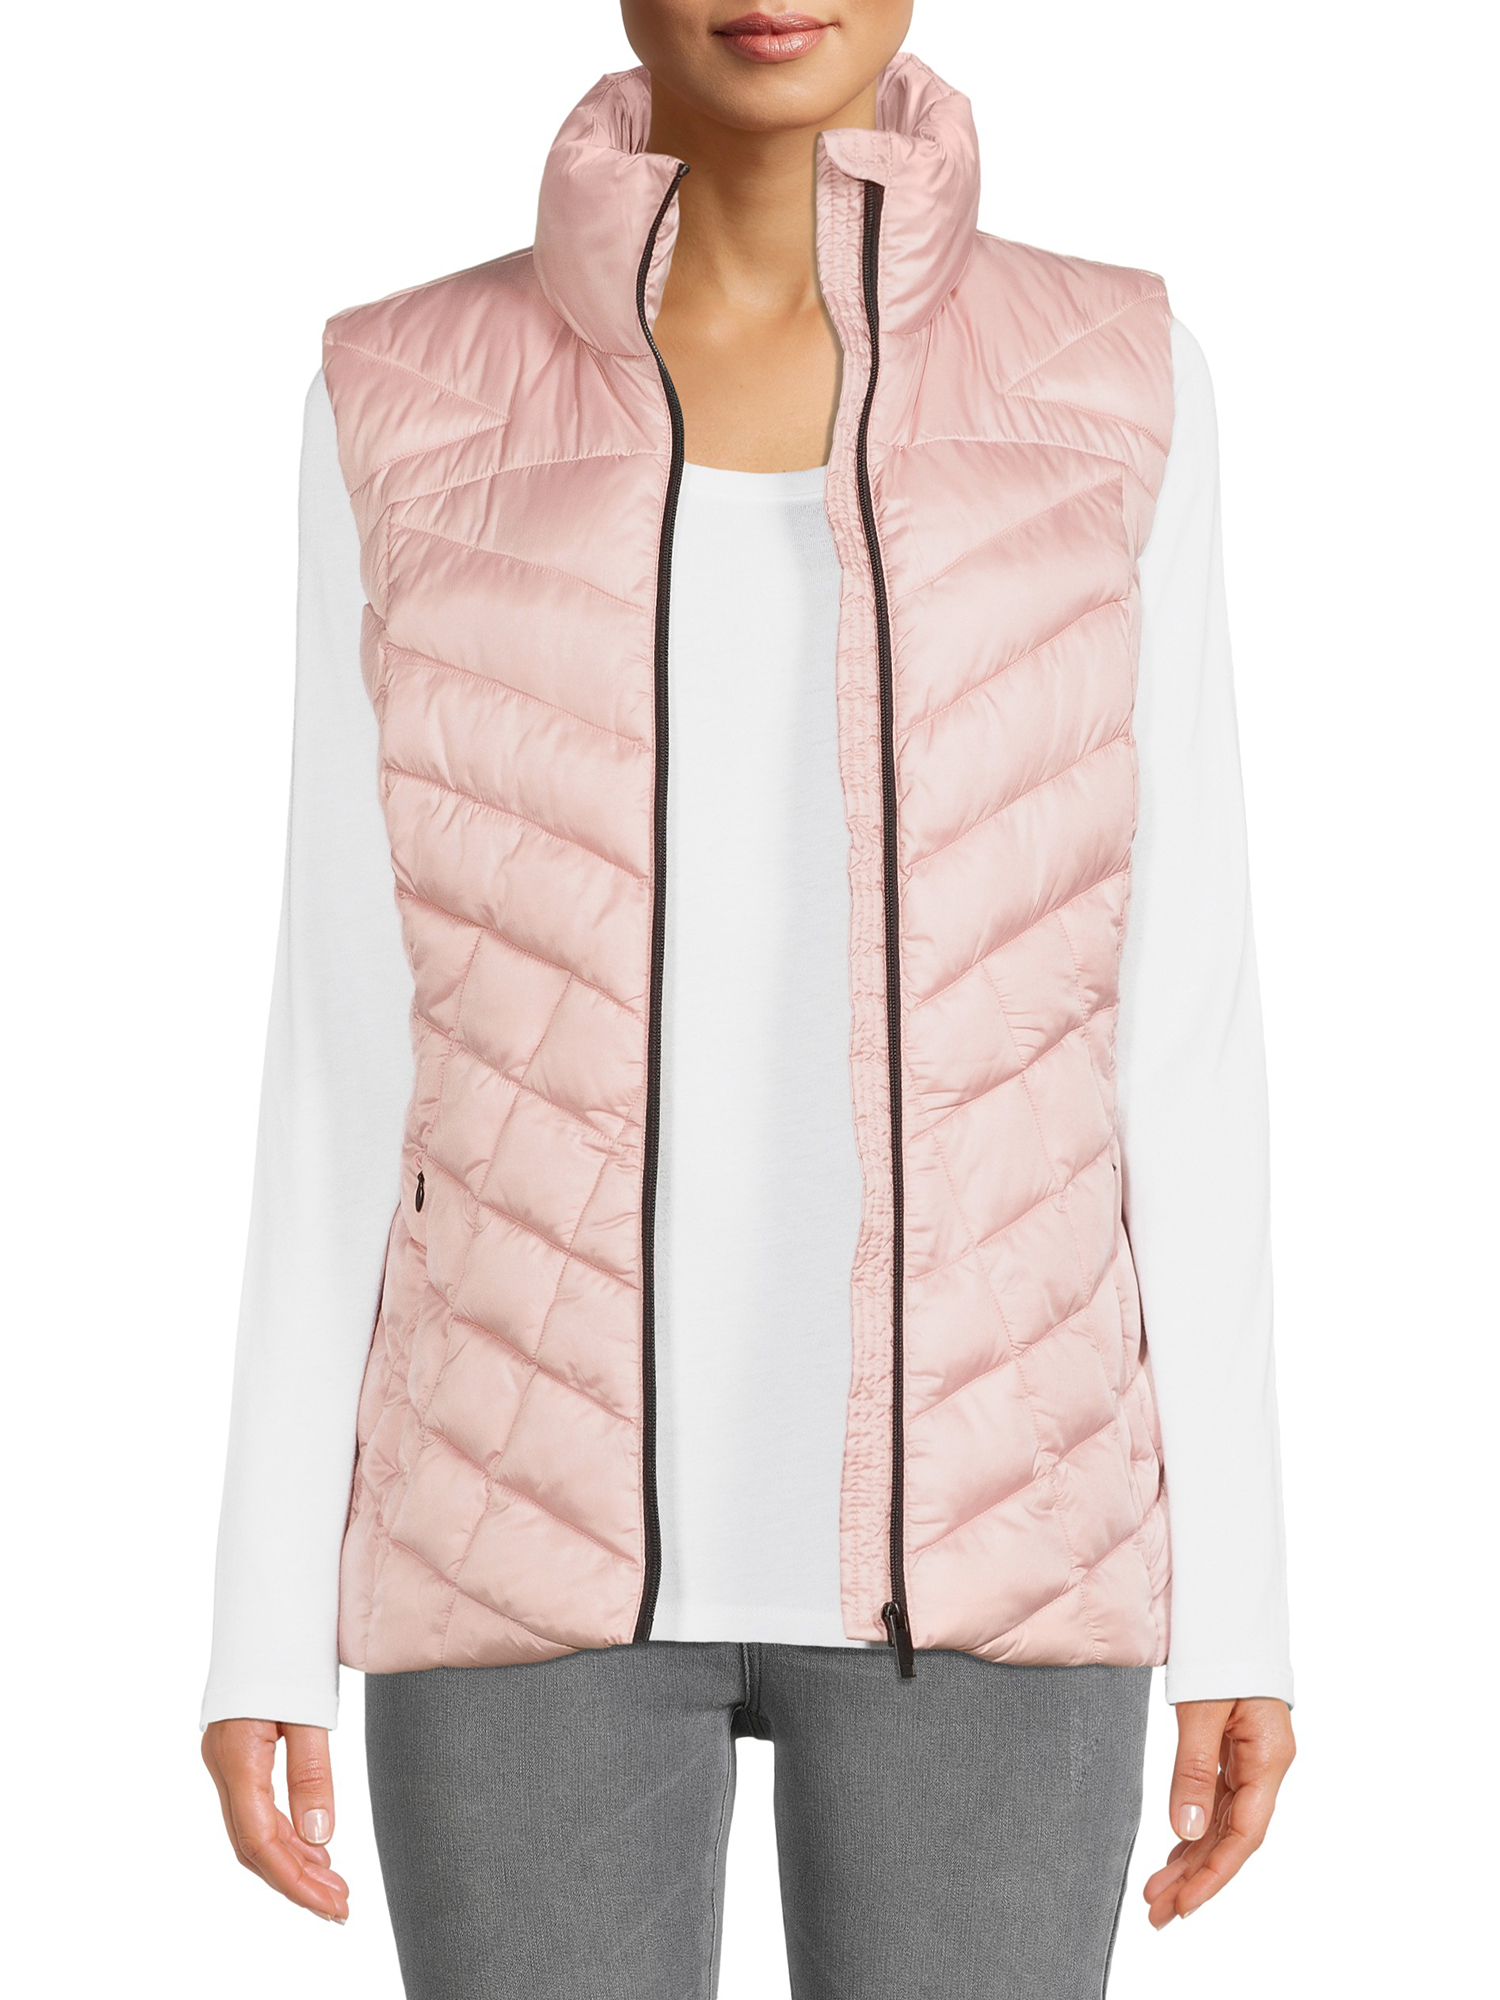 Big Chill Women's Chevron Quilted Puffer Vest - image 1 of 5